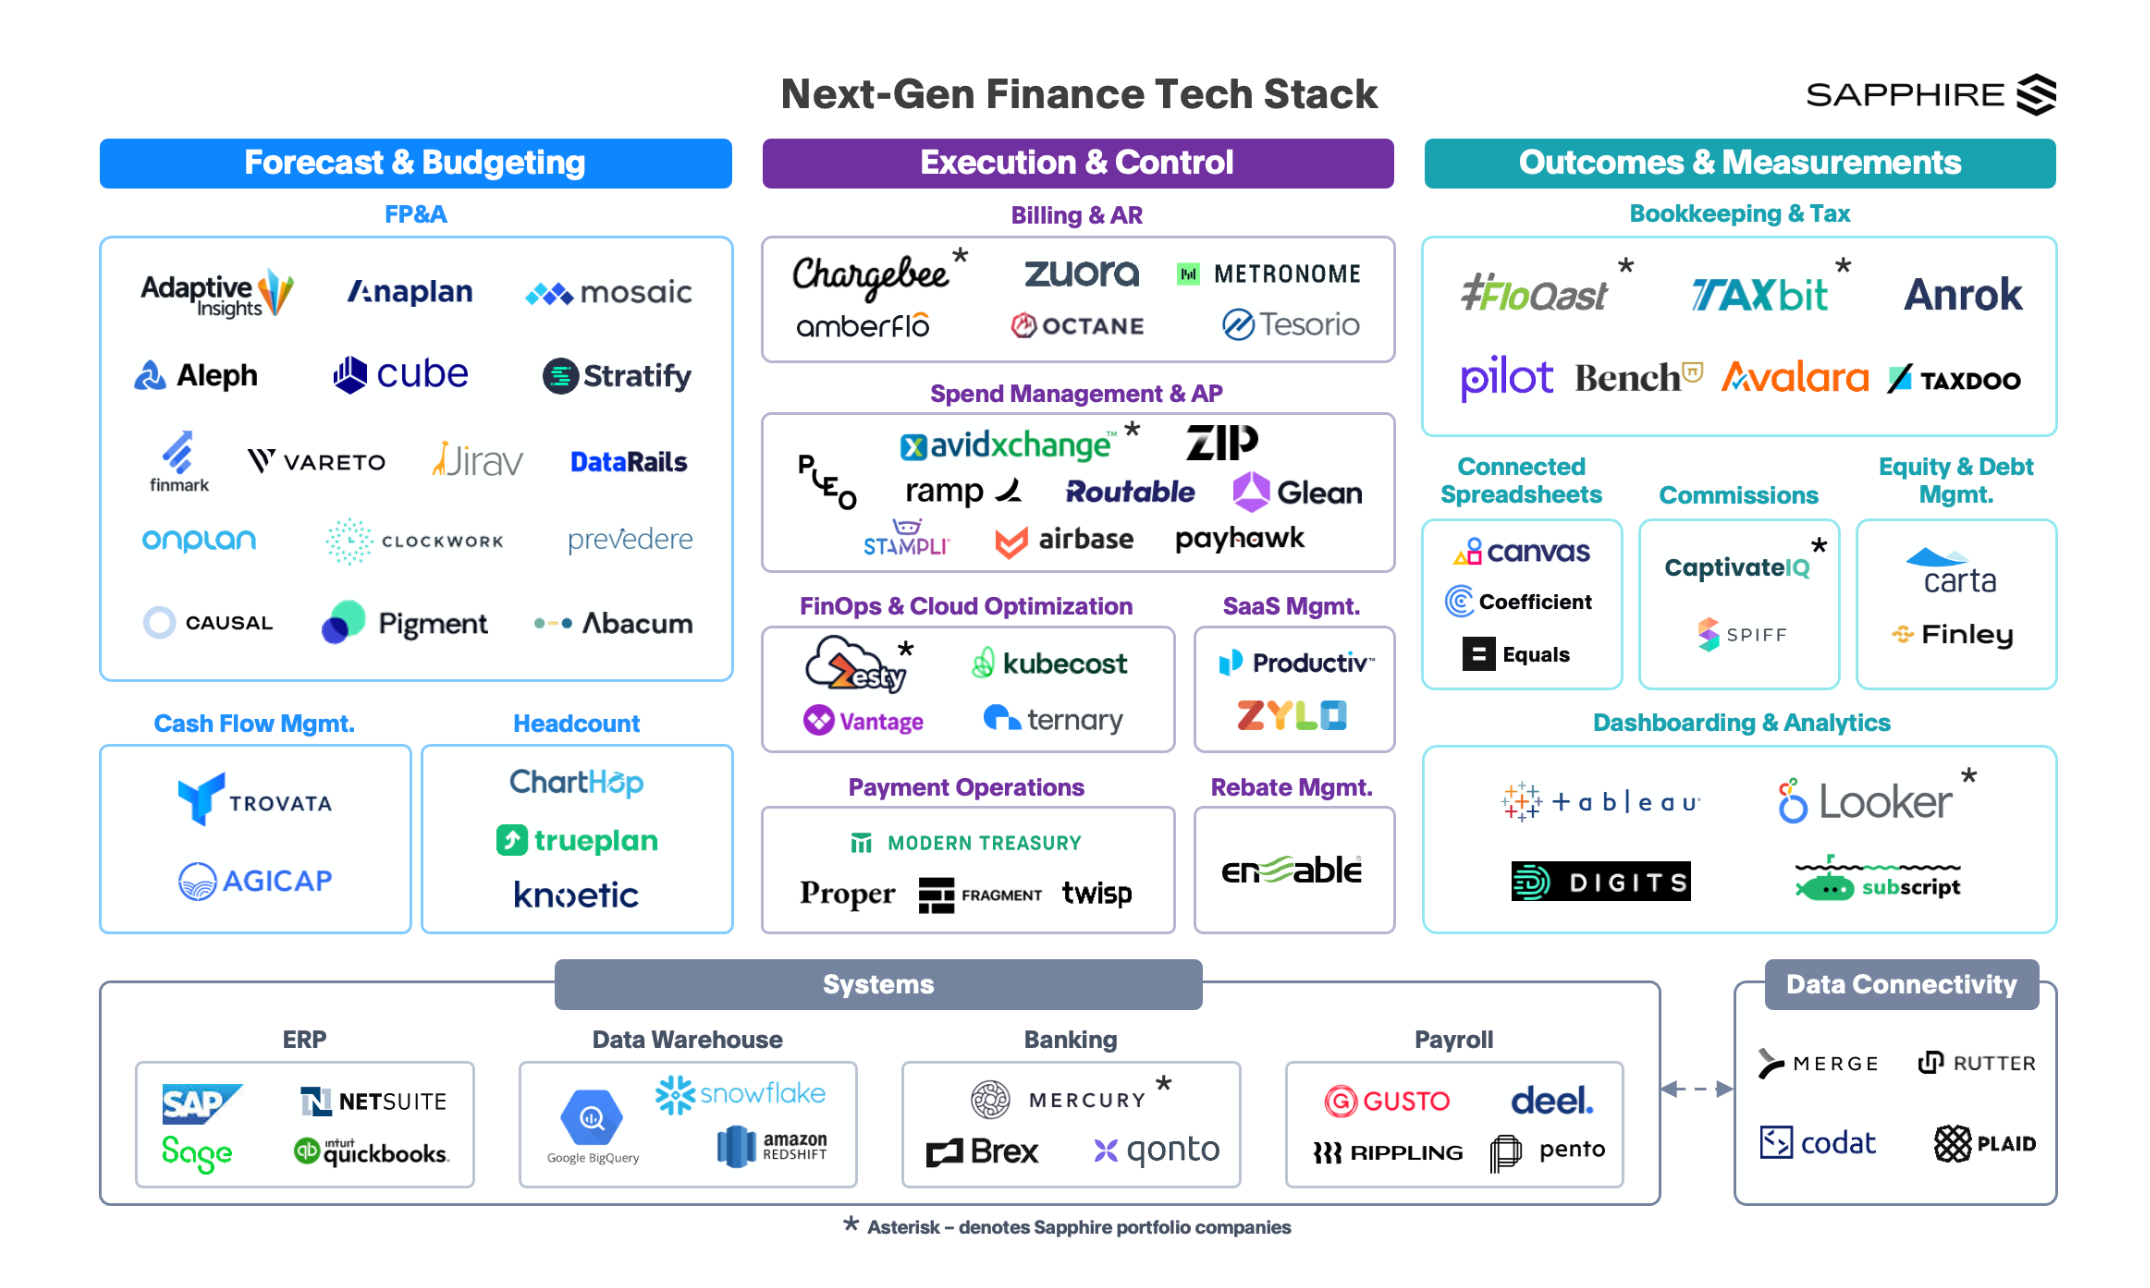 Here, Sapphire lays out what they call a “sprawling” fintech stack 